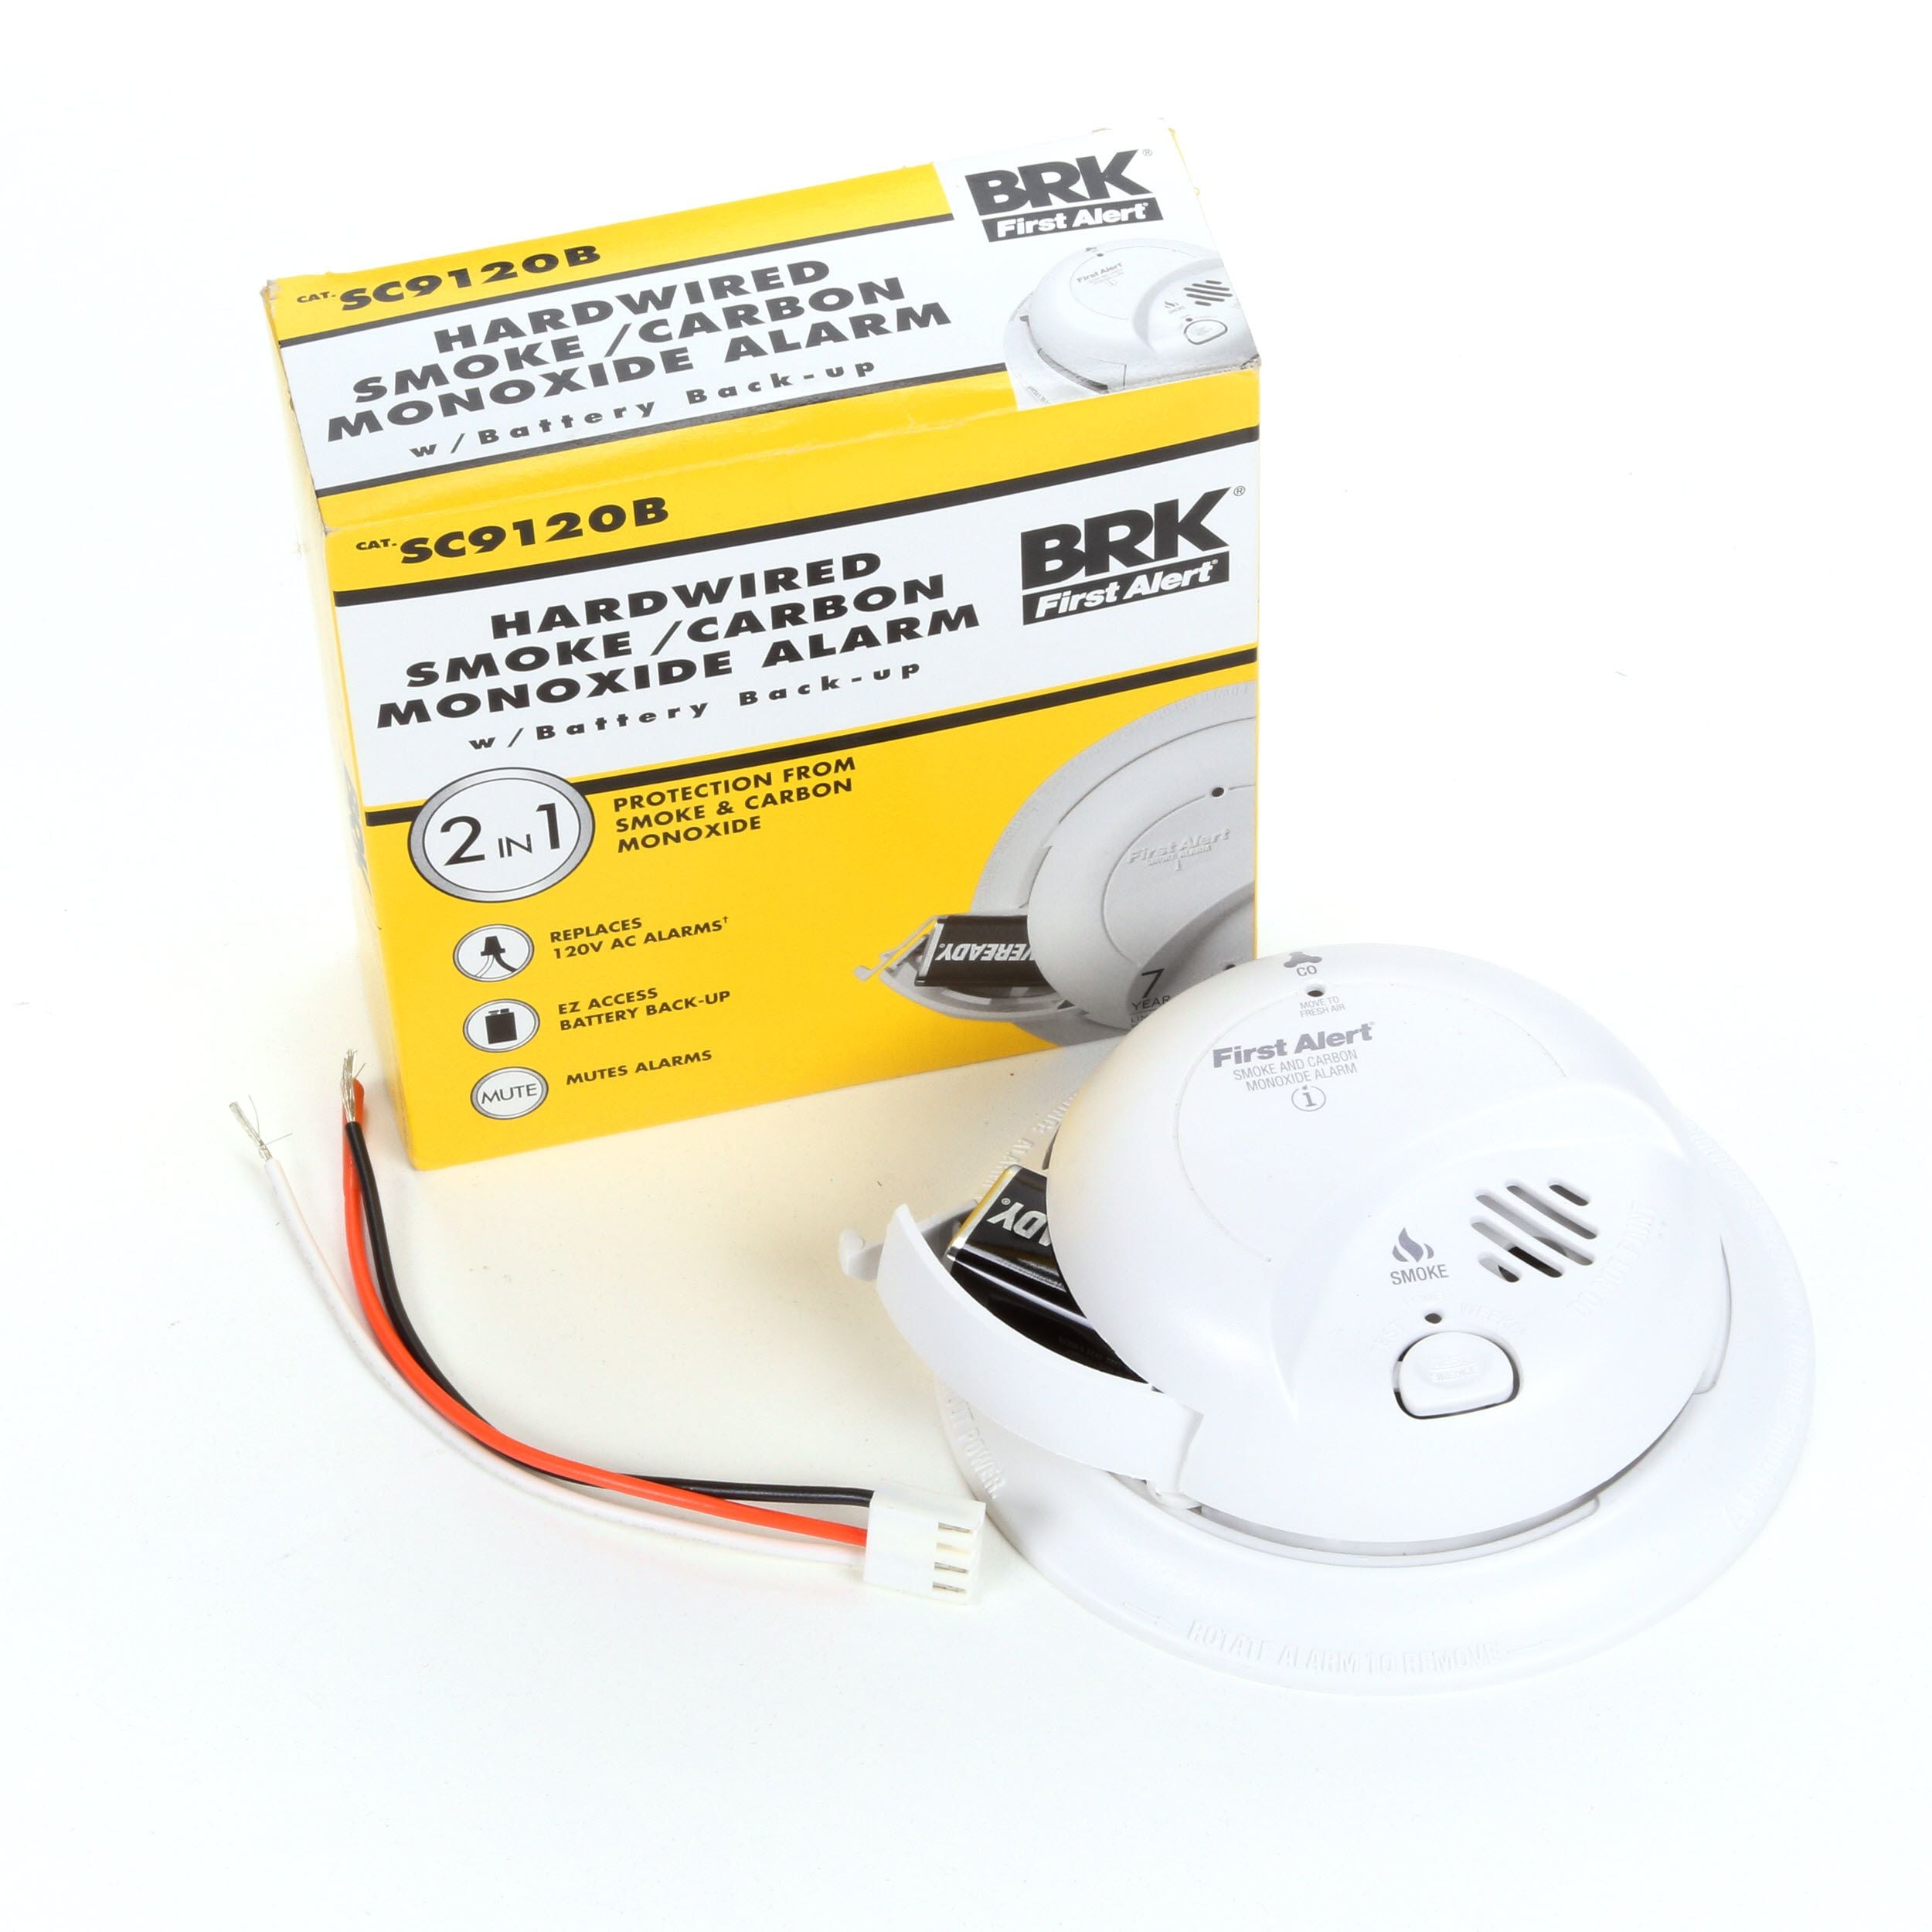 First Alert BRK AC Hardwired Combination Smoke and Carbon Monoxide Detector 